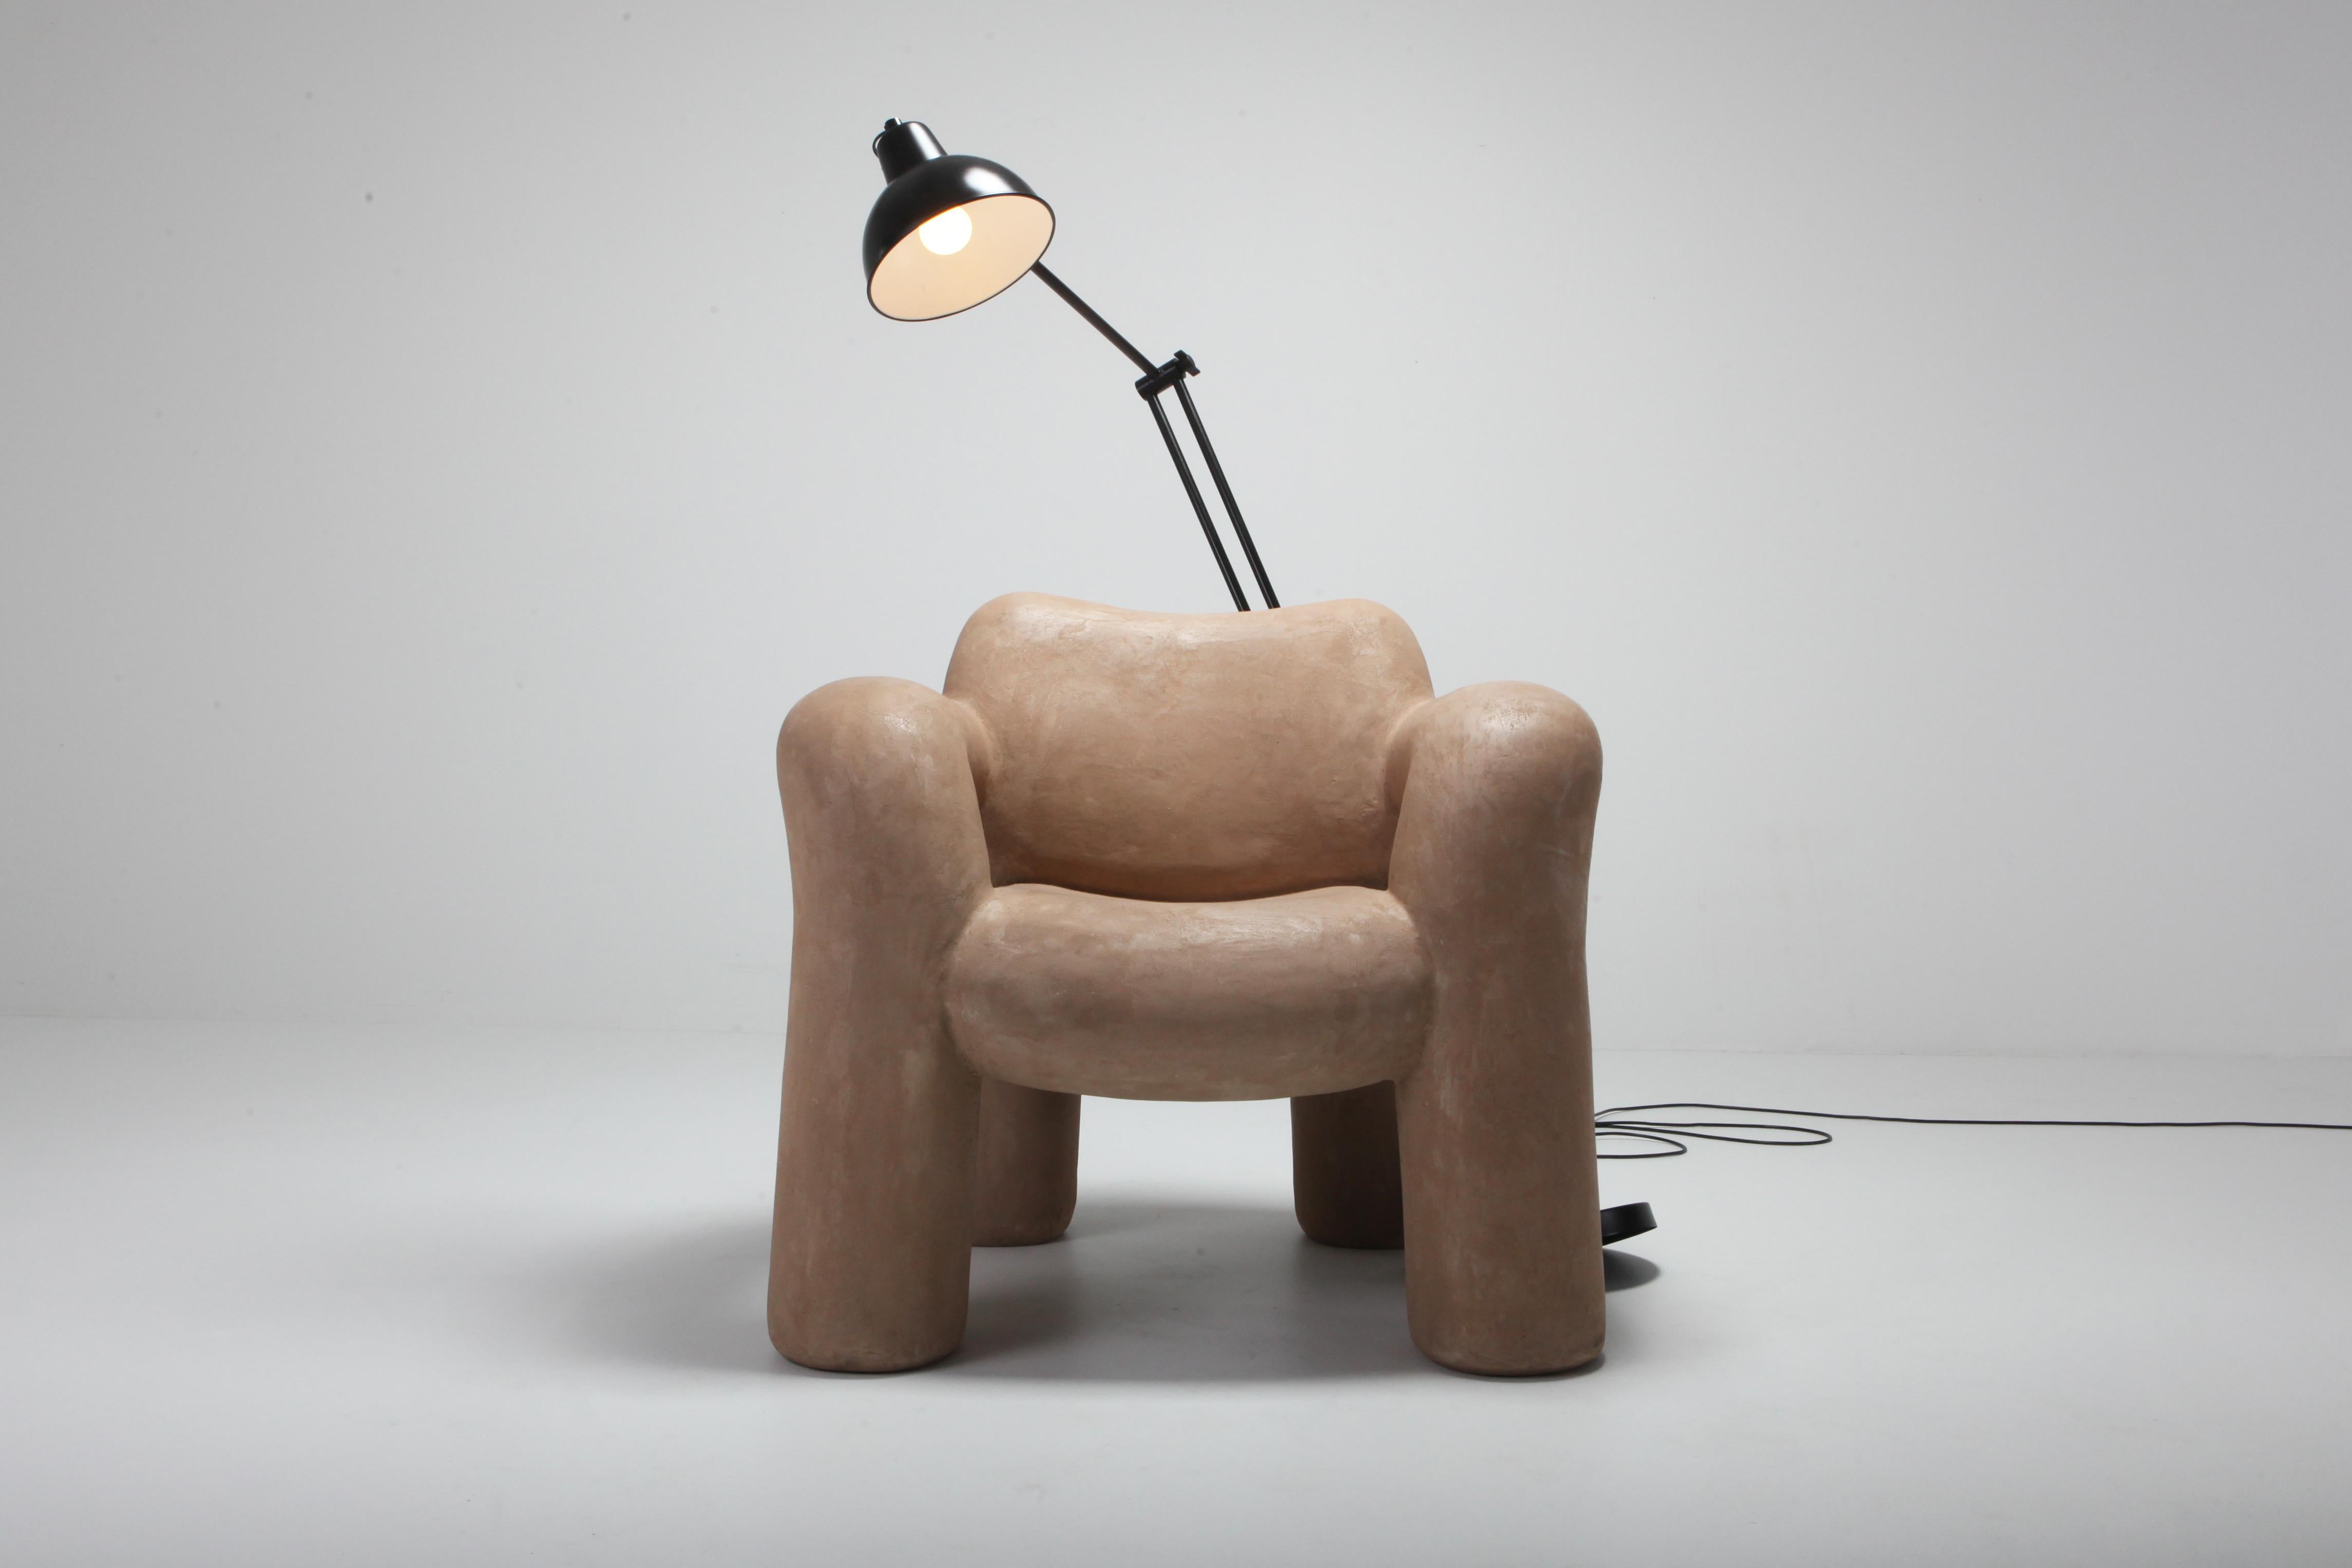 Blown up with lamp, collectible design
Sizes: width 95 cm, depth 80 cm, height 129 cm production method: 3D printed with robot arm material: recycled plastic
Finish/color: recycled cork coating, 'vegan leather'
Edition: unique piece

Schimmel &